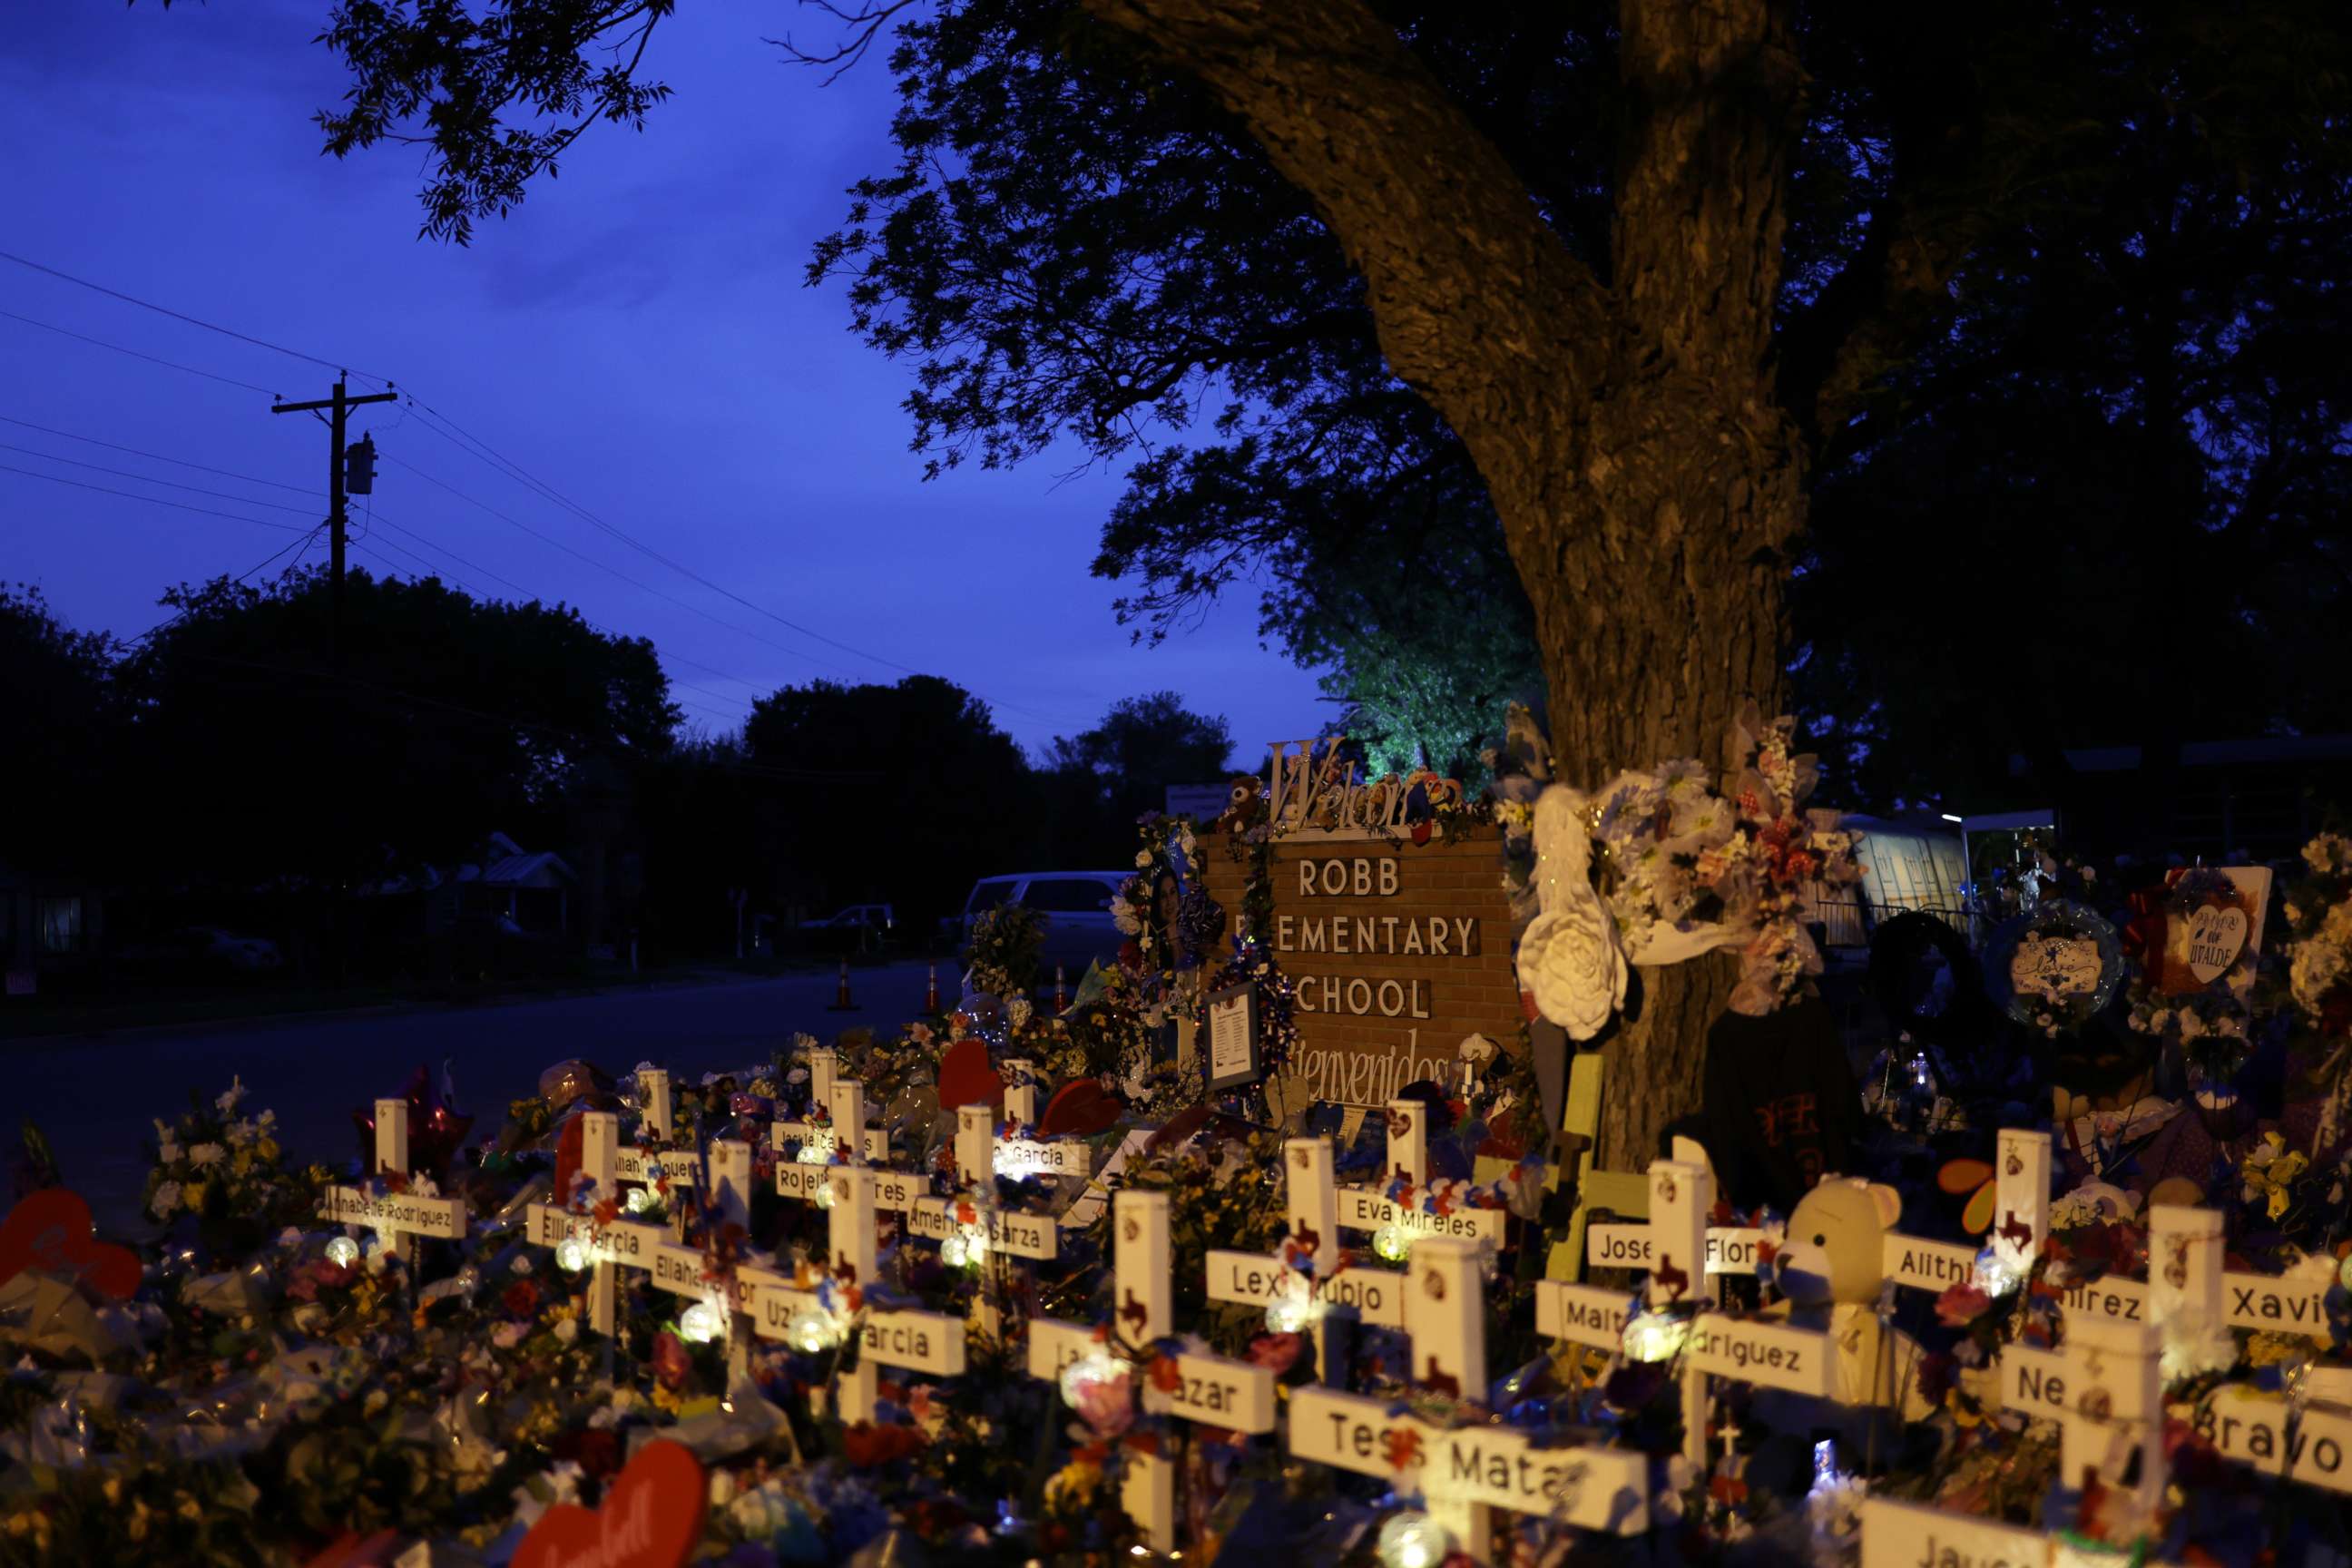 PHOTO: Wooden crosses are placed at a memorial dedicated to the victims of the mass shooting at Robb Elementary School, in a photo taken June 3, 2022 in Uvalde, Texas.